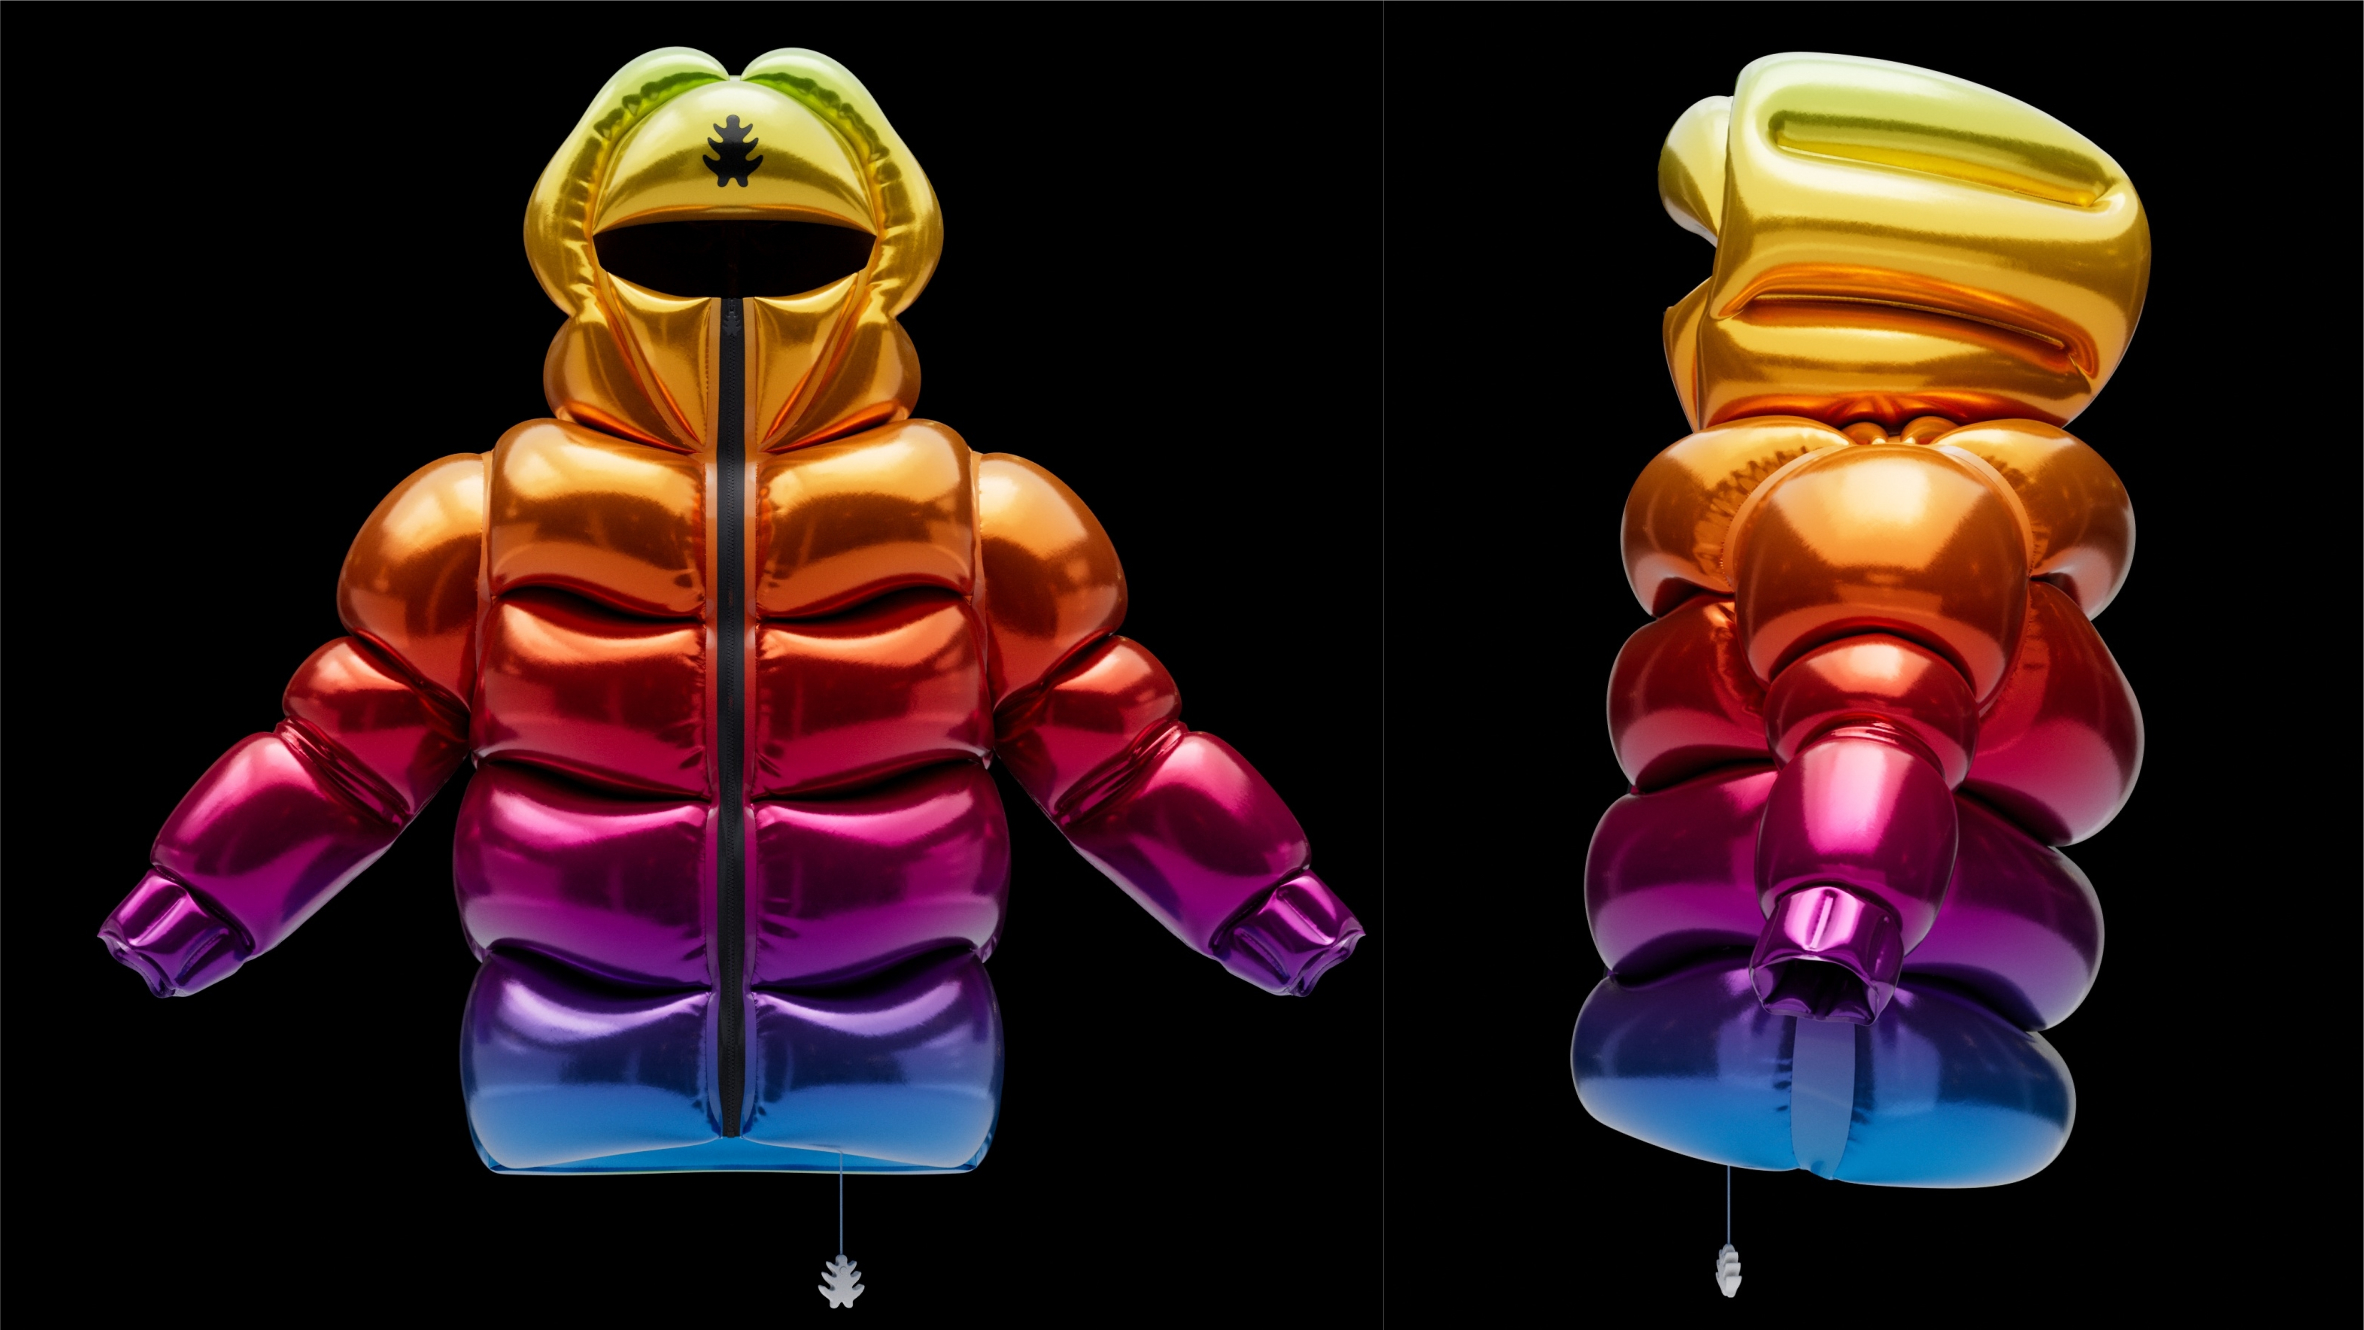 Helium-10000 is an inflatable puffer coat that floats like a balloon